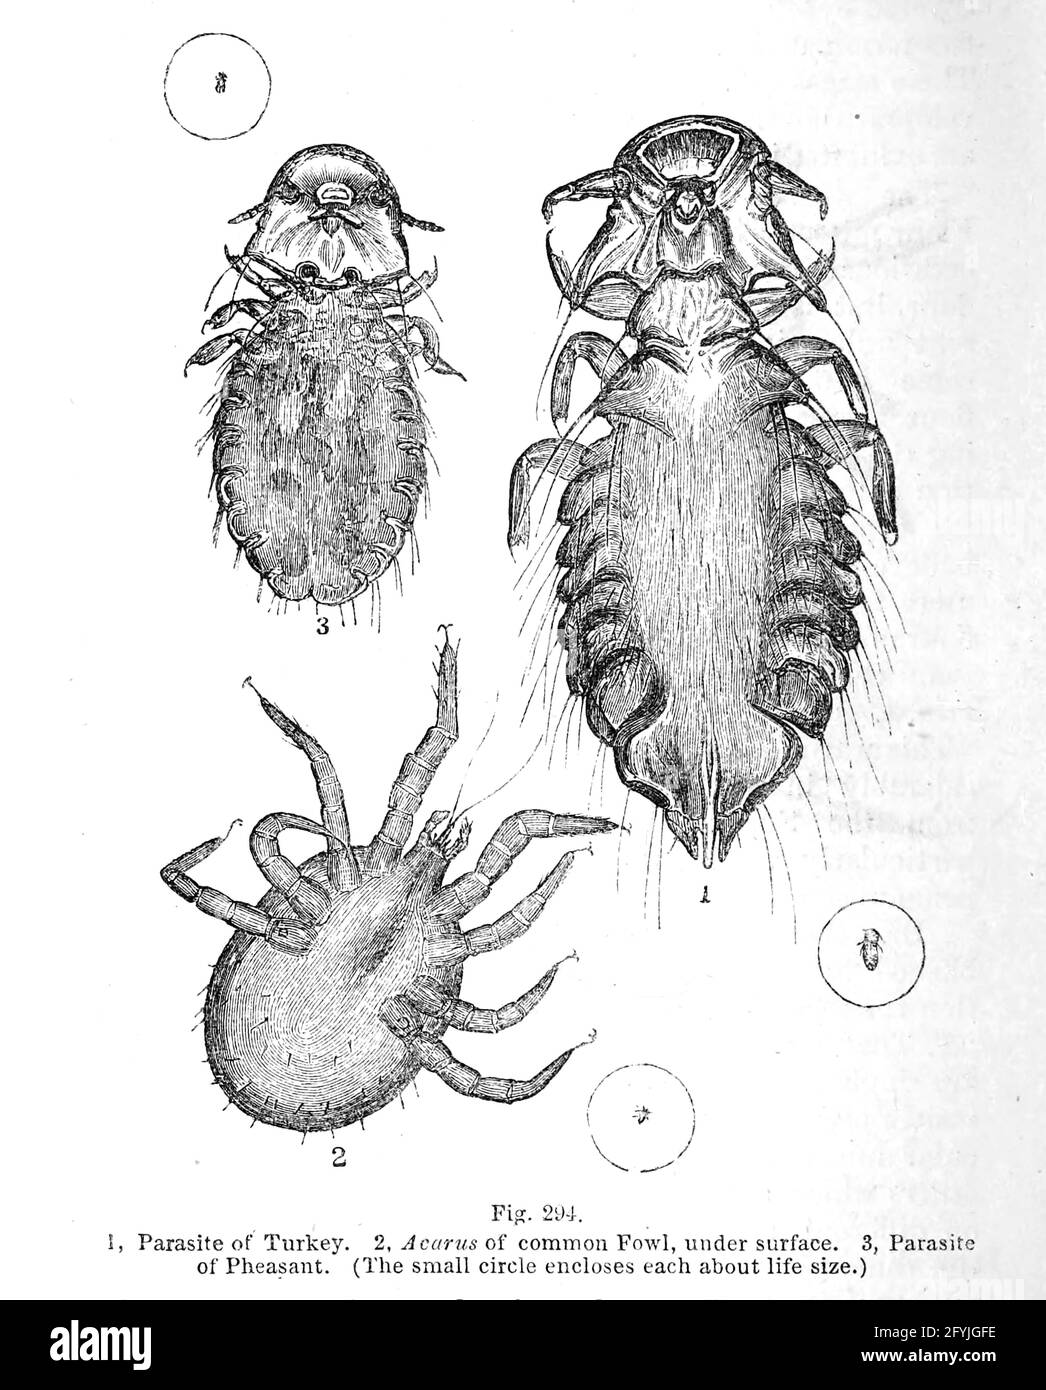 Artwork of tiny Organisms under microscope From the book '  The microscope : its history, construction, and application ' by Hogg, Jabez, 1817-1899 Published in London by G. Routledge in 1869 with Illustrations by TUFFEN WEST Stock Photo